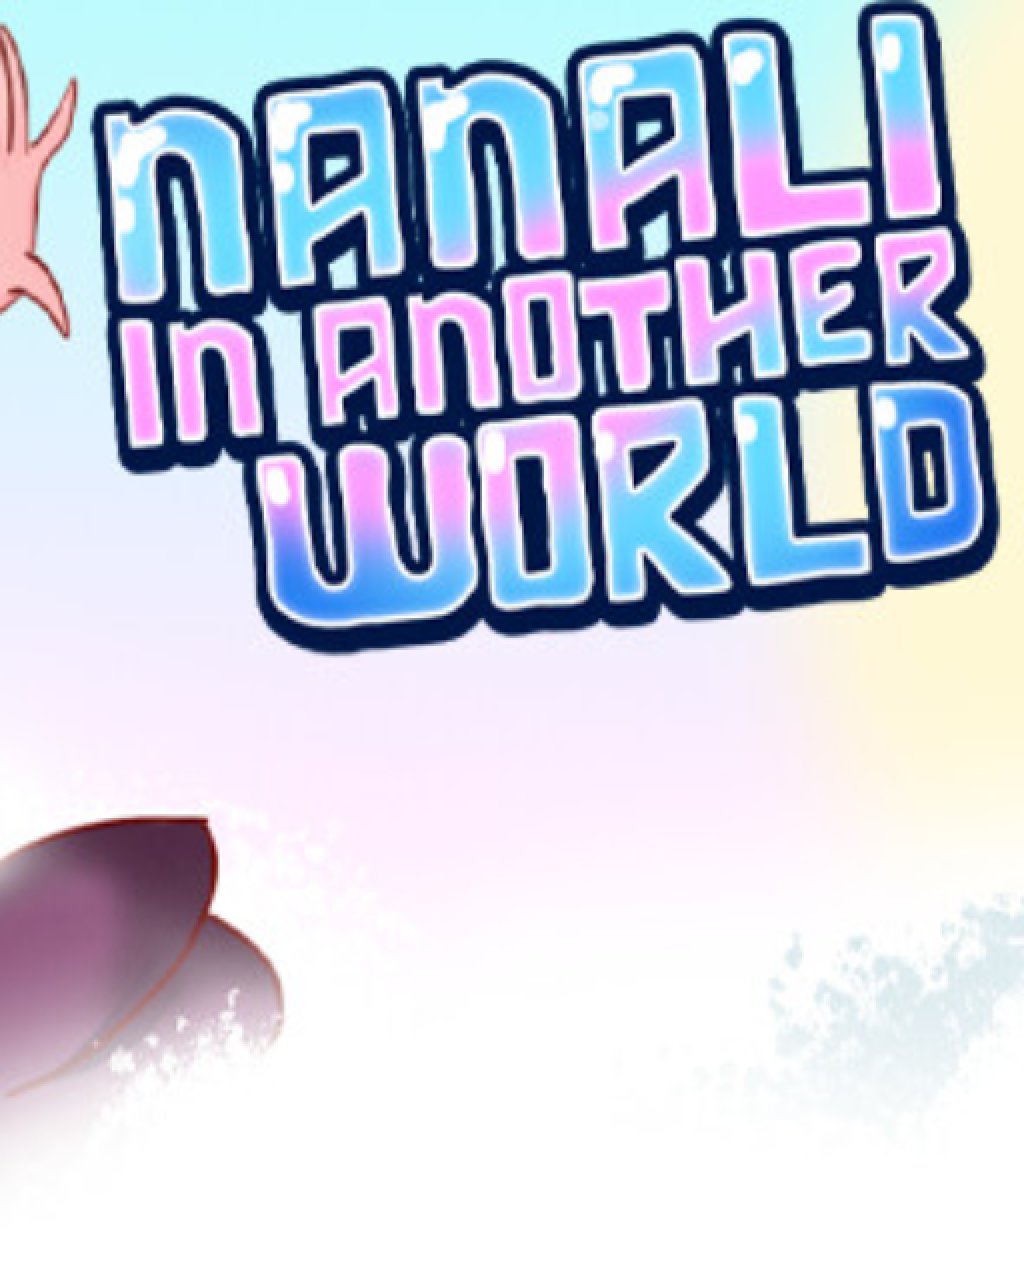 Nanali in another world